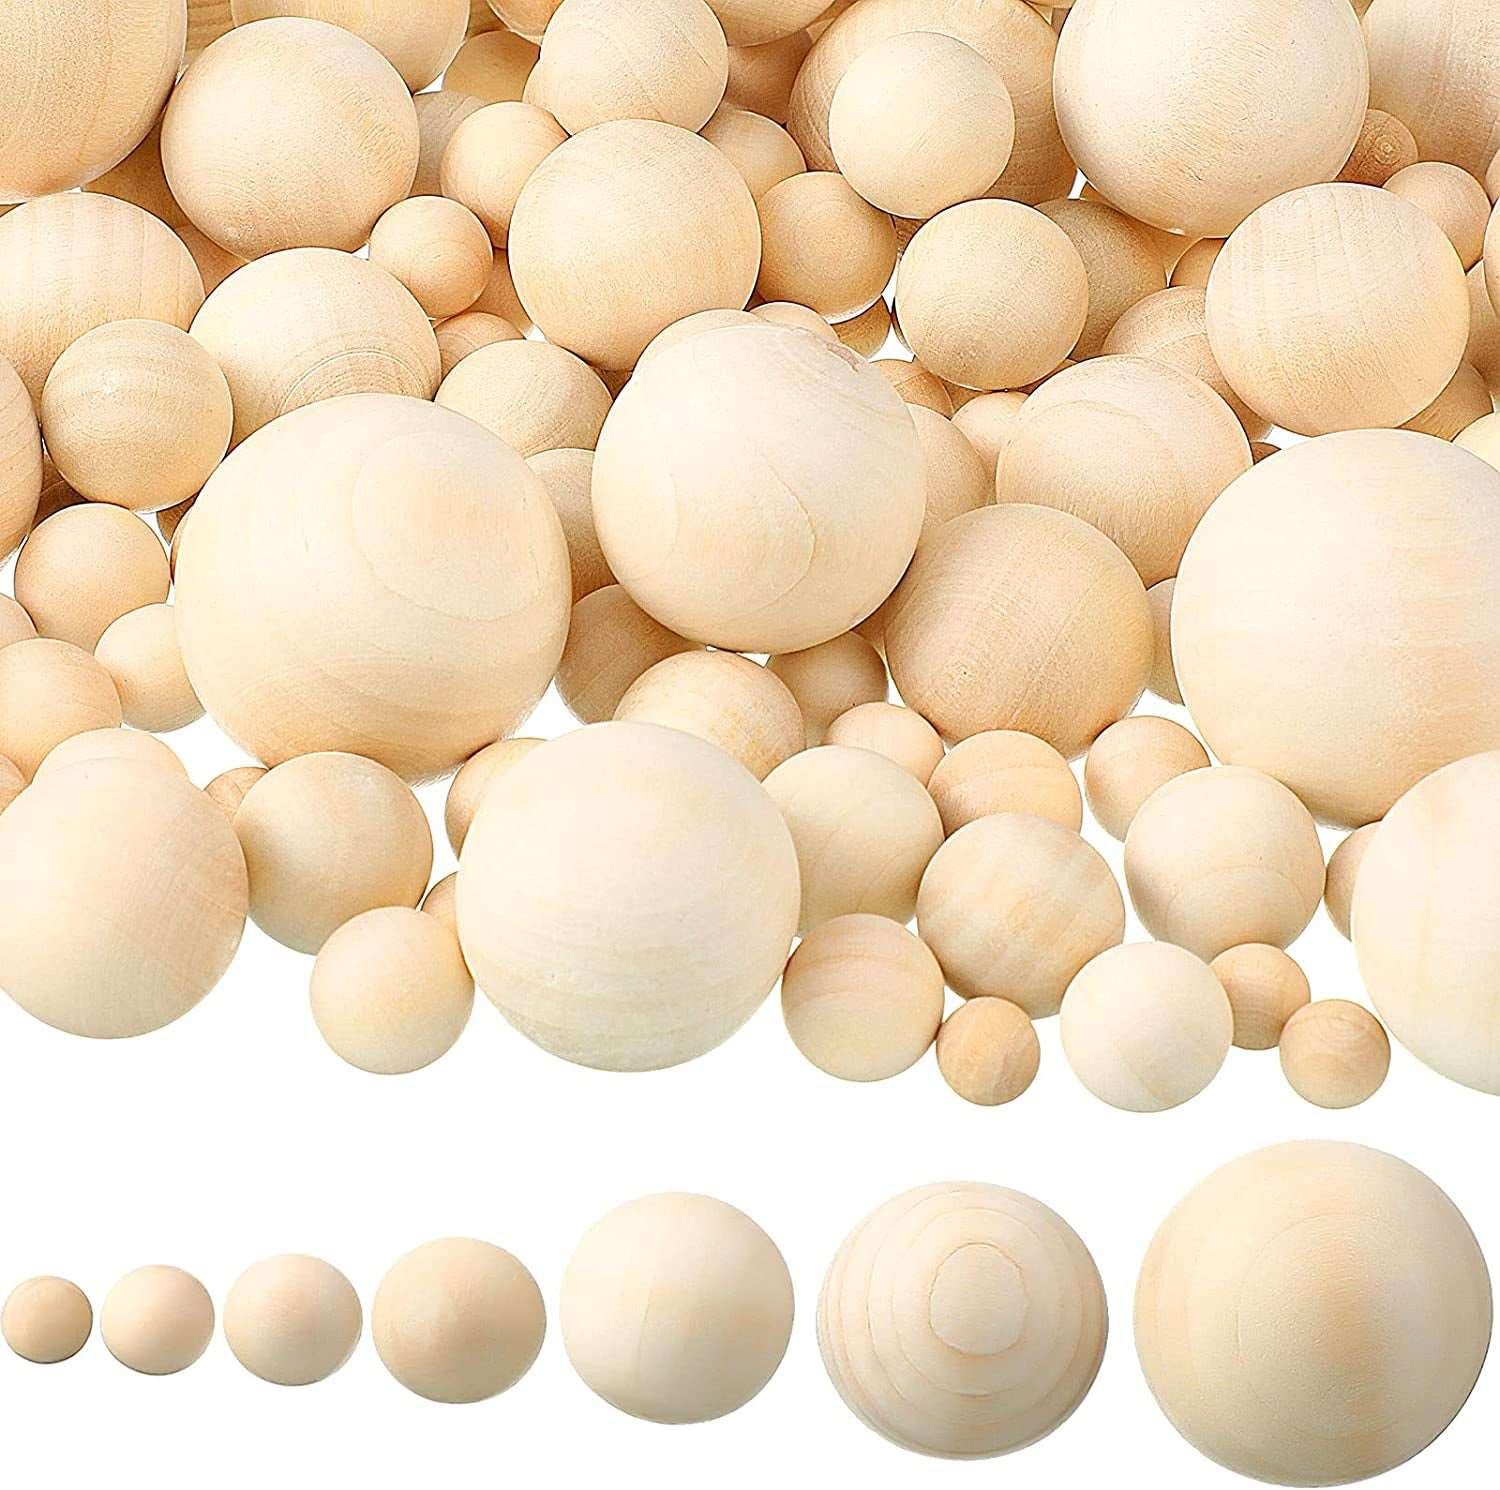 250 Pieces Wooden Balls Unfinished round Wood Balls Craft Small Assorted  Spheres in 7 Sizes DIY Craft Projects Jewelry